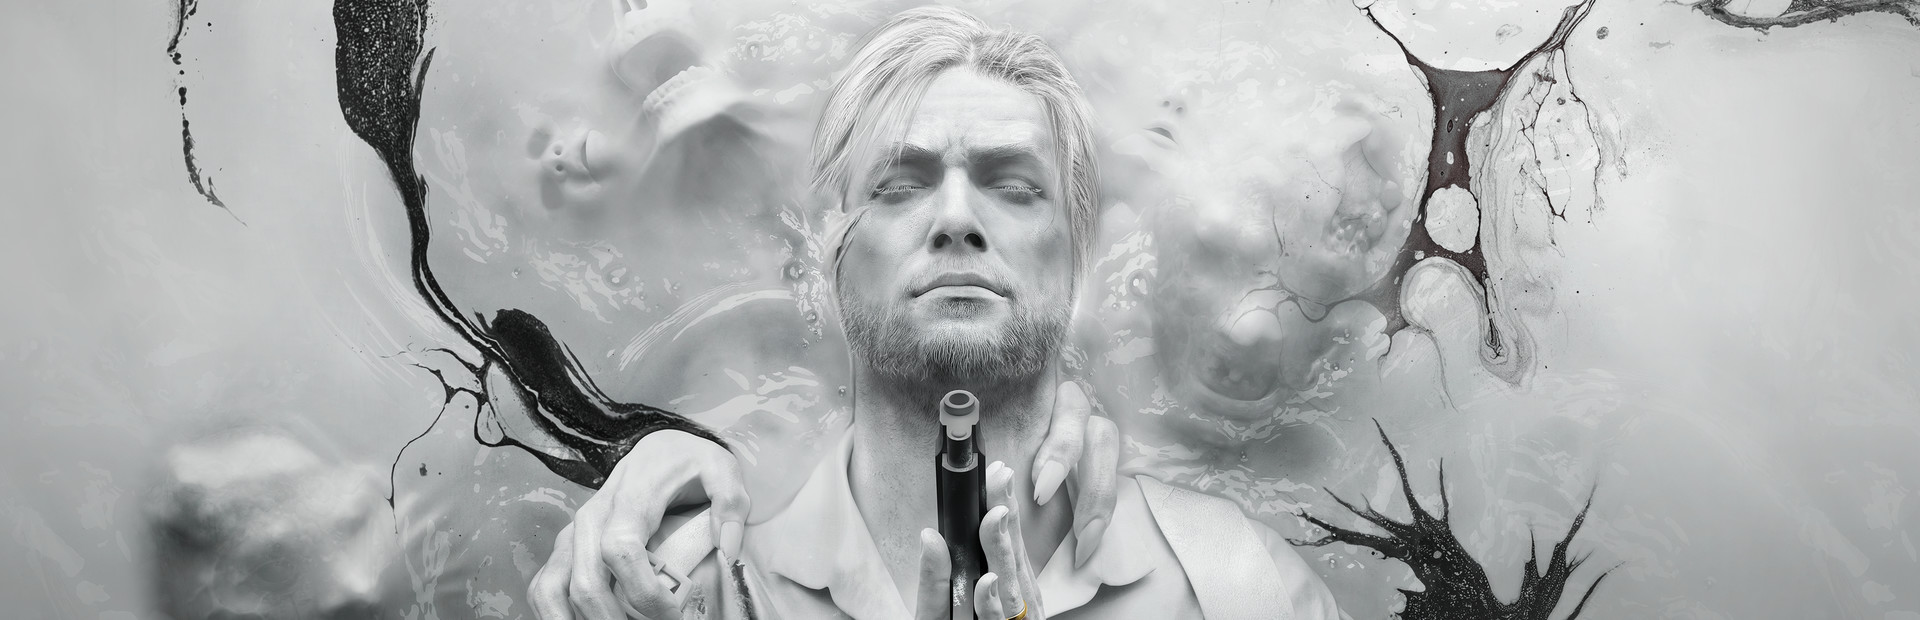 The Evil Within 2 cover image